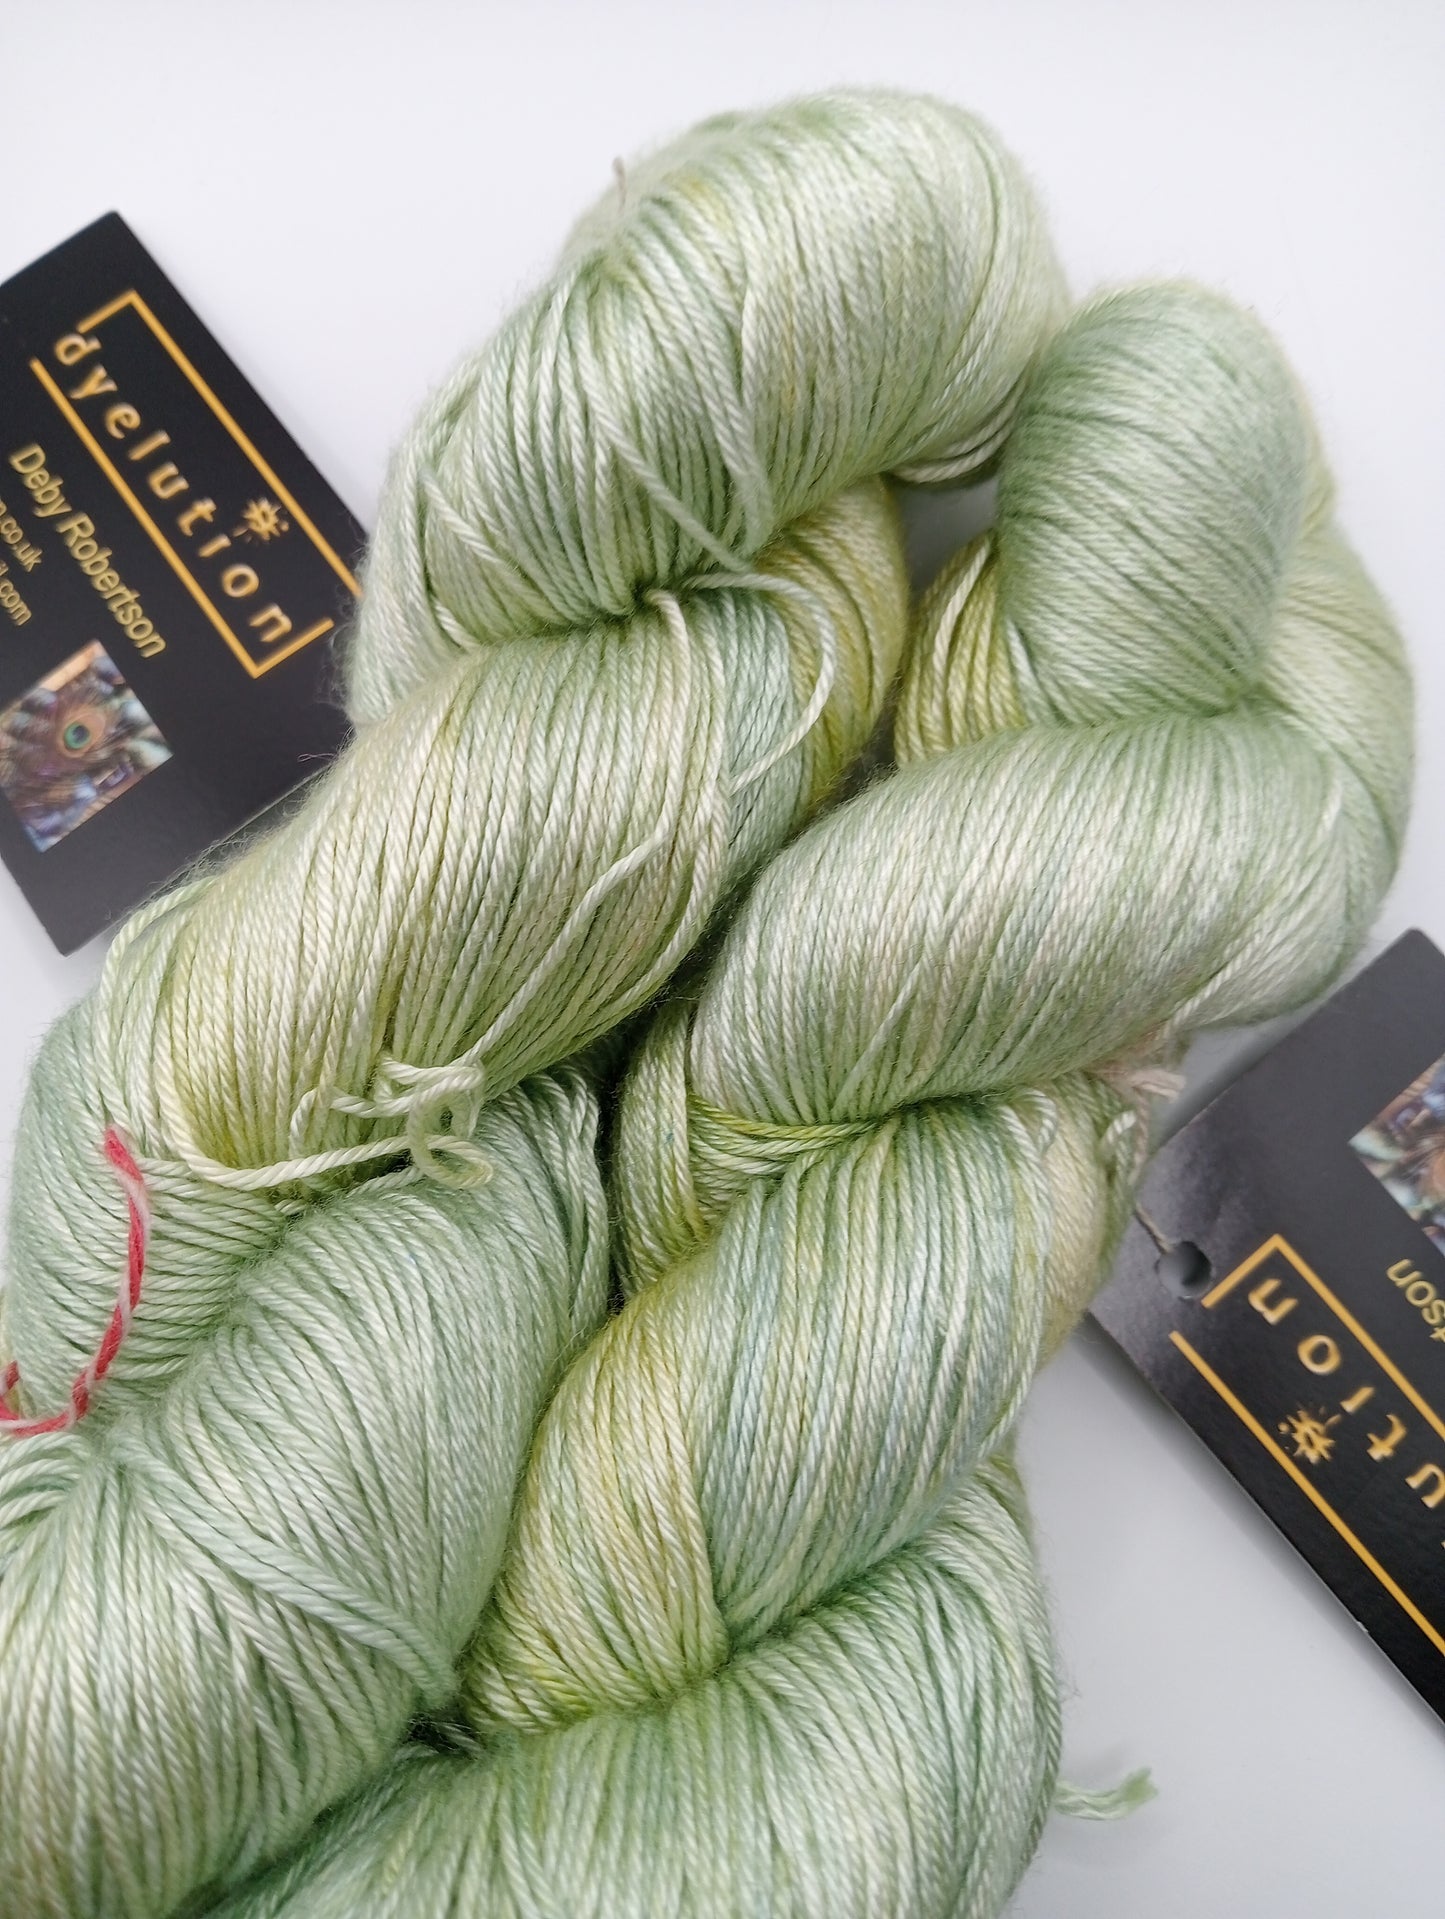 100G 'A' Grade Pure Mulberry Silk 4 Ply- "Pistachio"  Hand Dyed